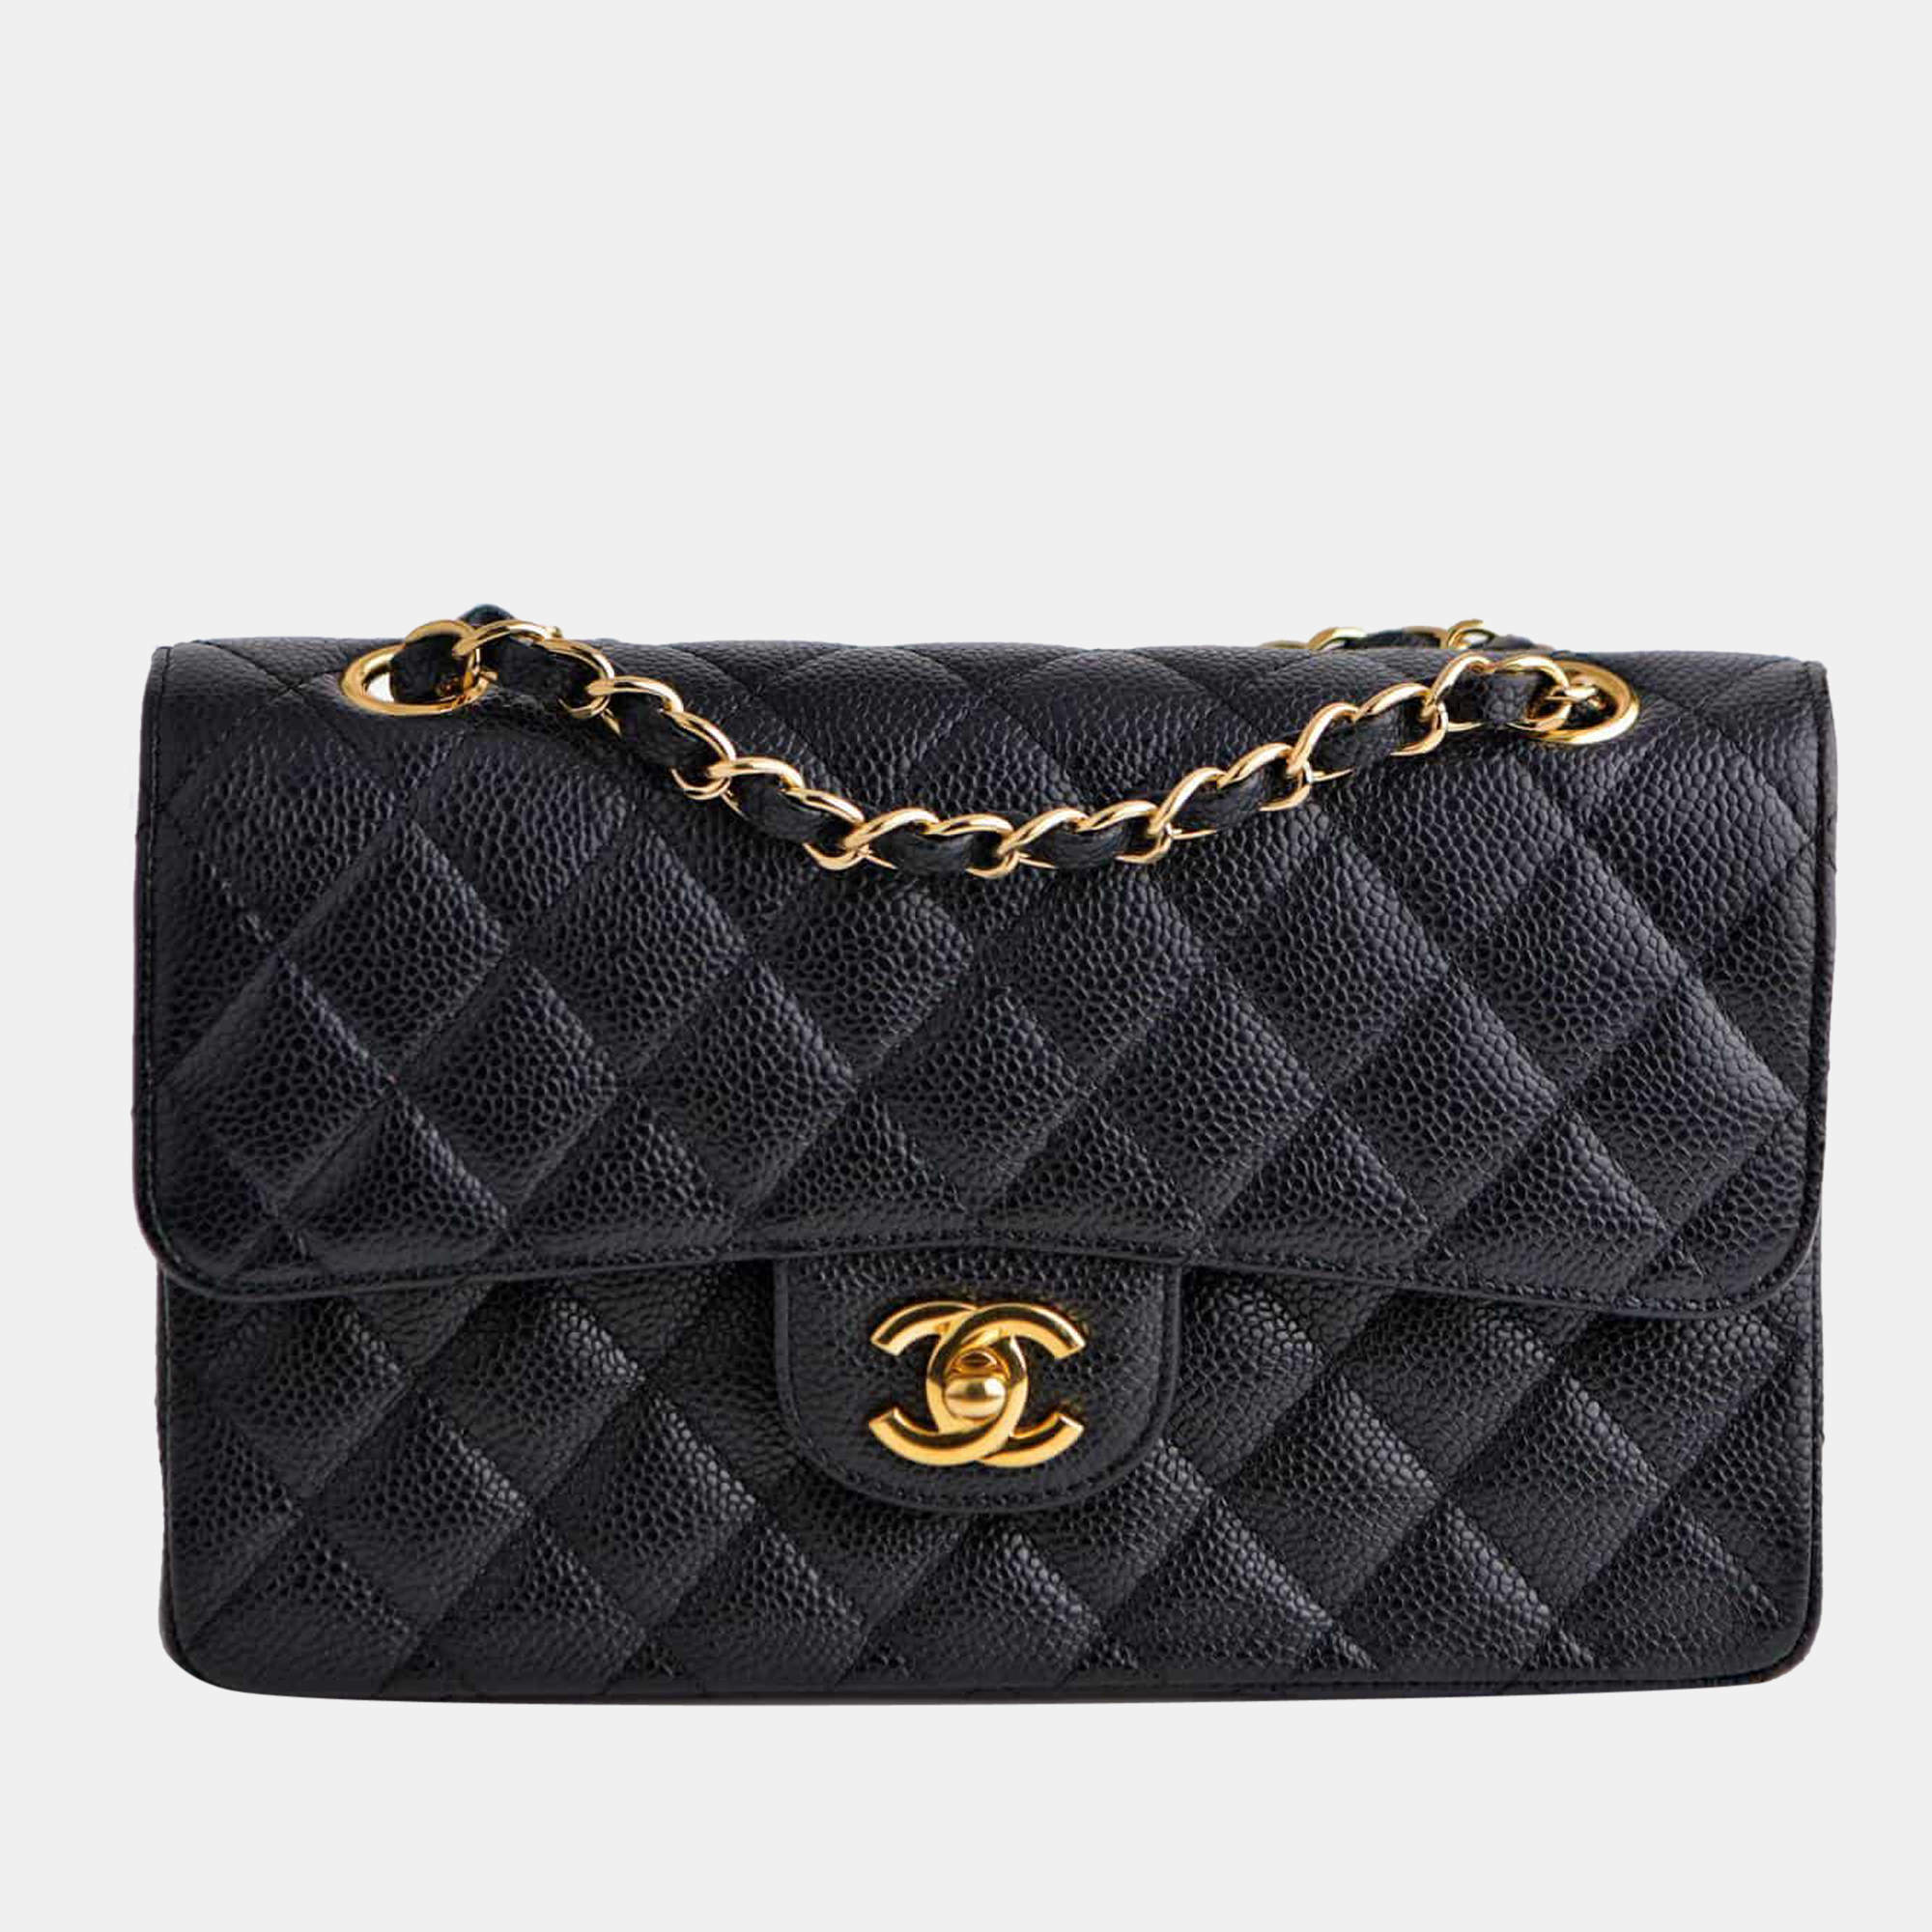 Chanel - Classic Flap Bag - Small - Black Caviar - GHW - Pre-Loved